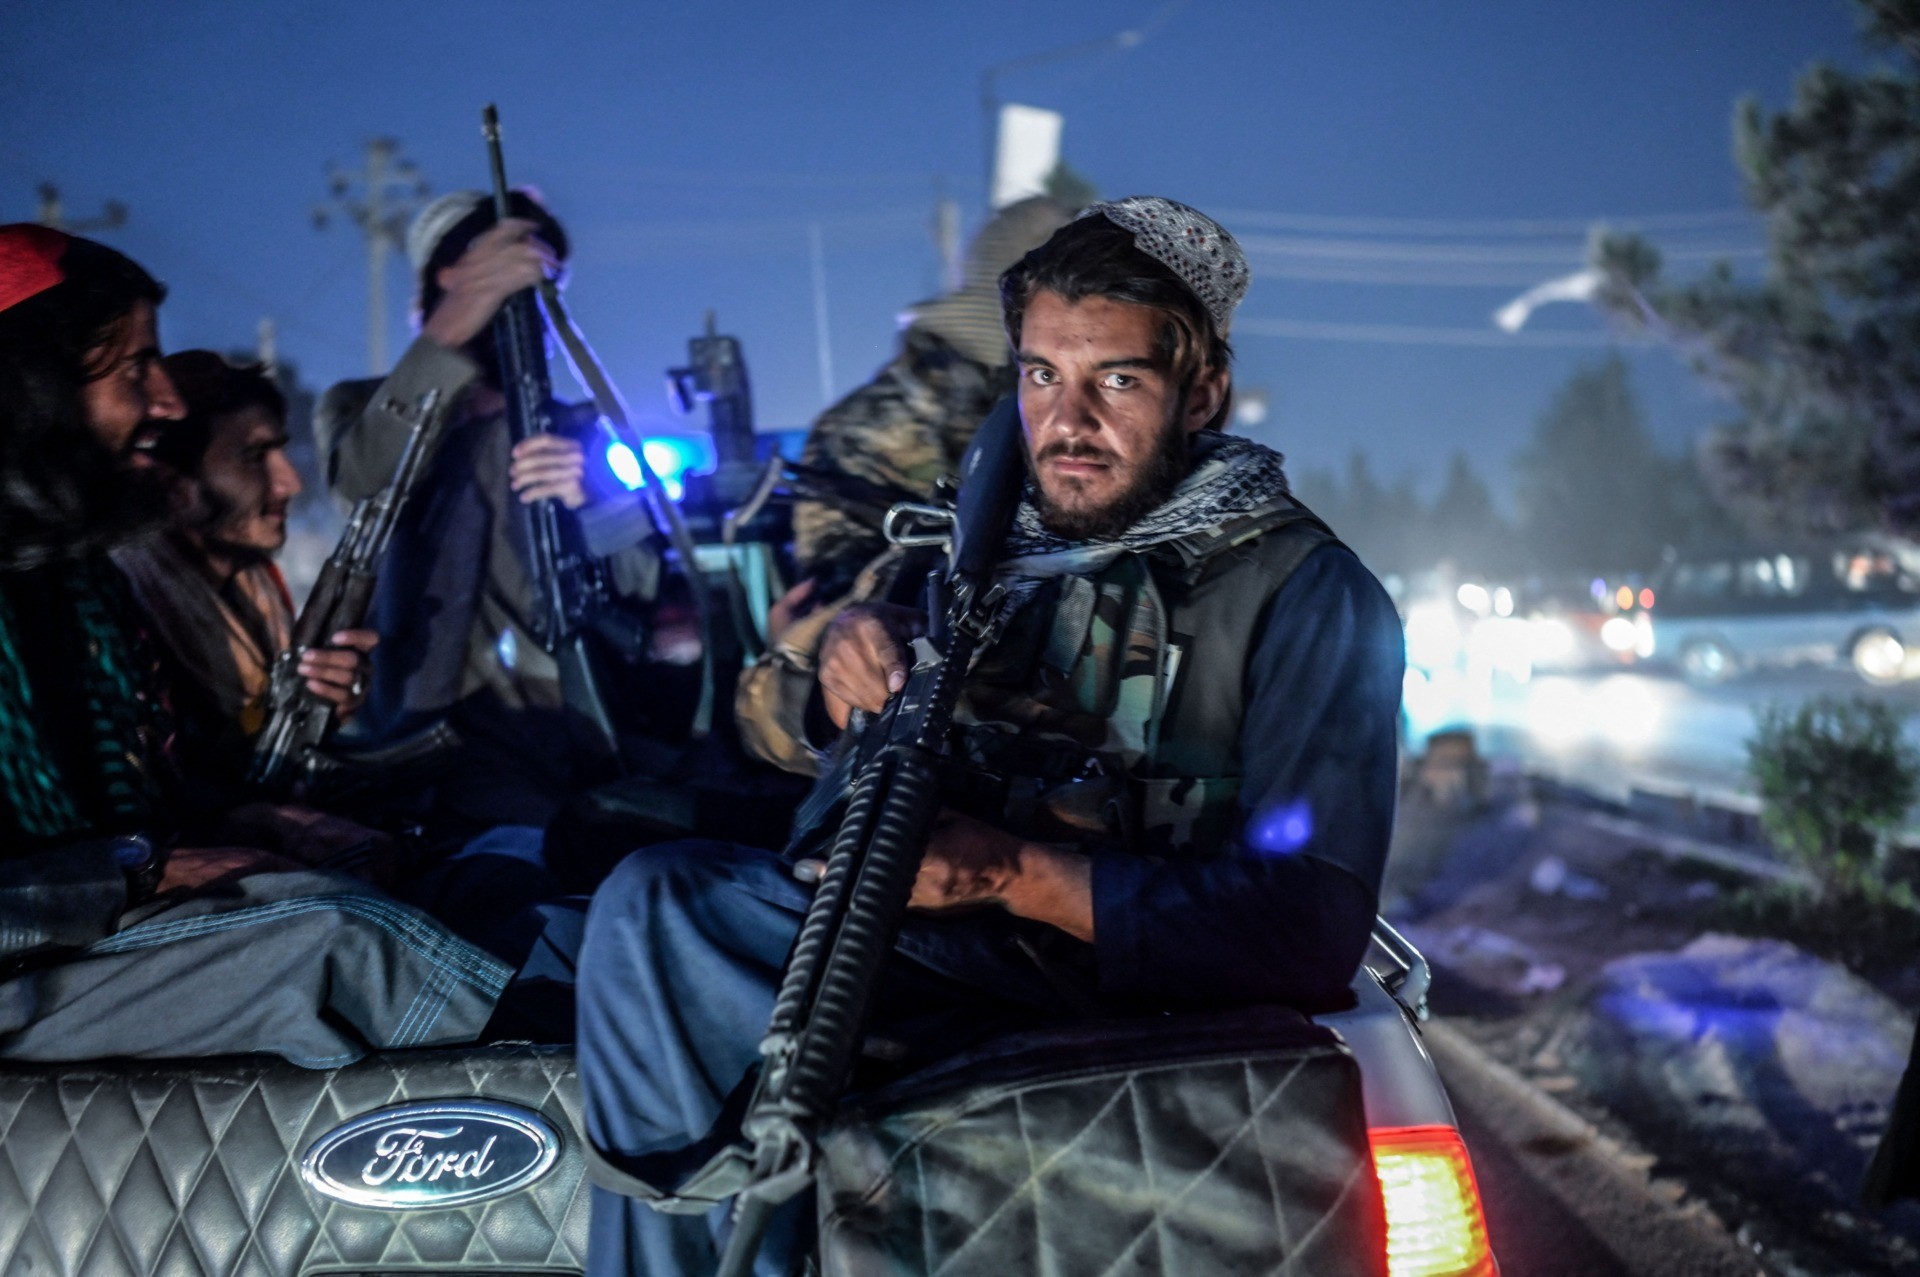 Members of the Taliban patrol on a pickup truck in Kabul on September 30, 2021. (Photo by BULENT KILIC / AFP) (Photo by BULENT KILIC/AFP via Getty Images)